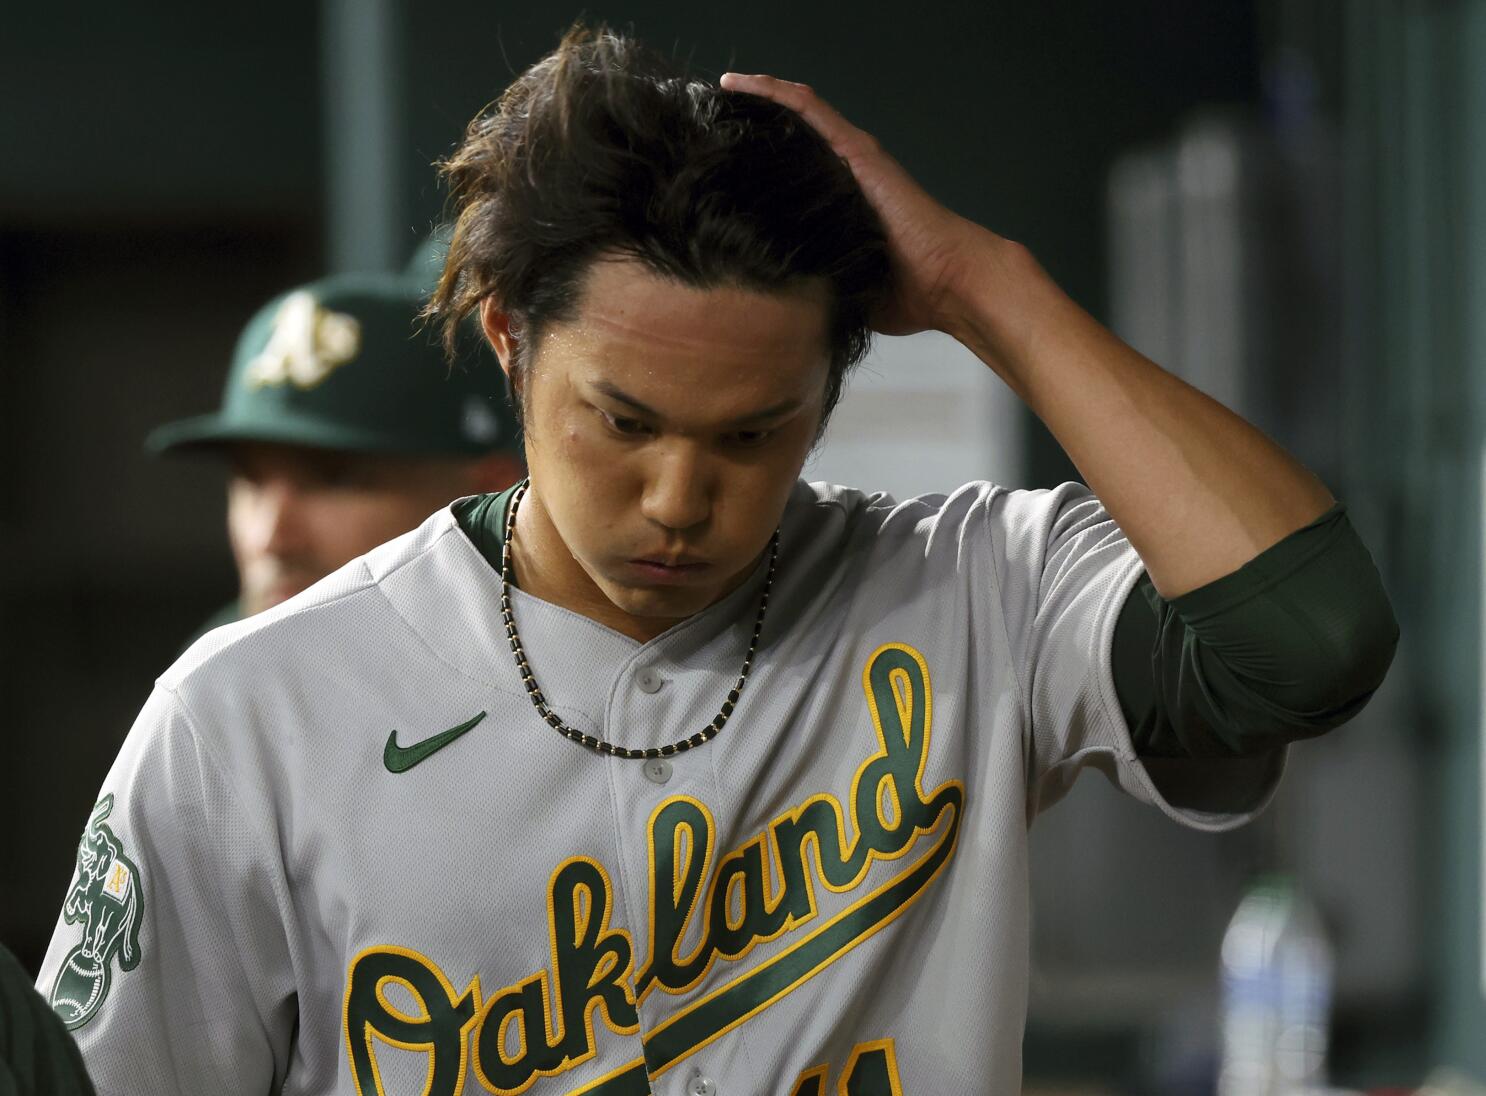 A's move Japanese rookie Fujinami to bullpen